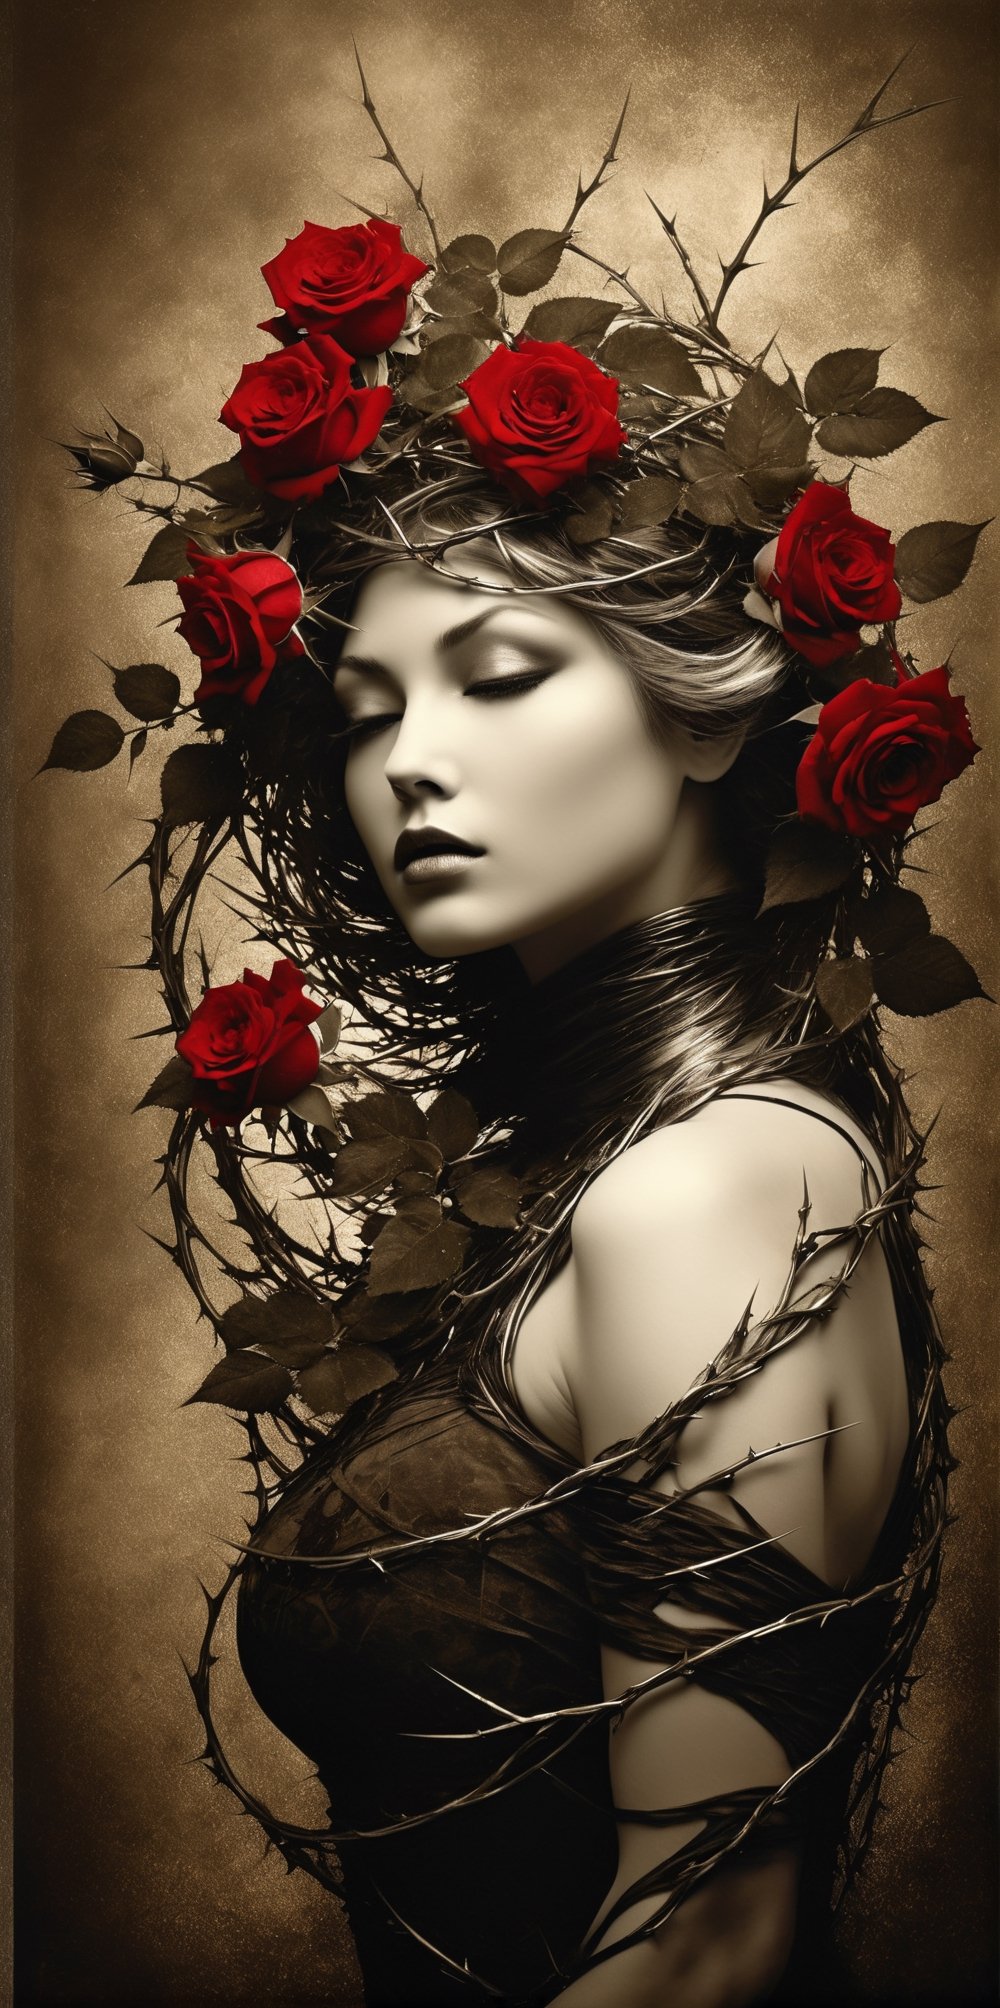 black, silver and white colors, ((( a long exposed and degrated photo imatge))) of a stunningly old sepia photo of (green thorns) and (red roses) huging the silhouette of a dramatic, hiperrealistic and detailed woman, dark fantasy, portrait photography, photo